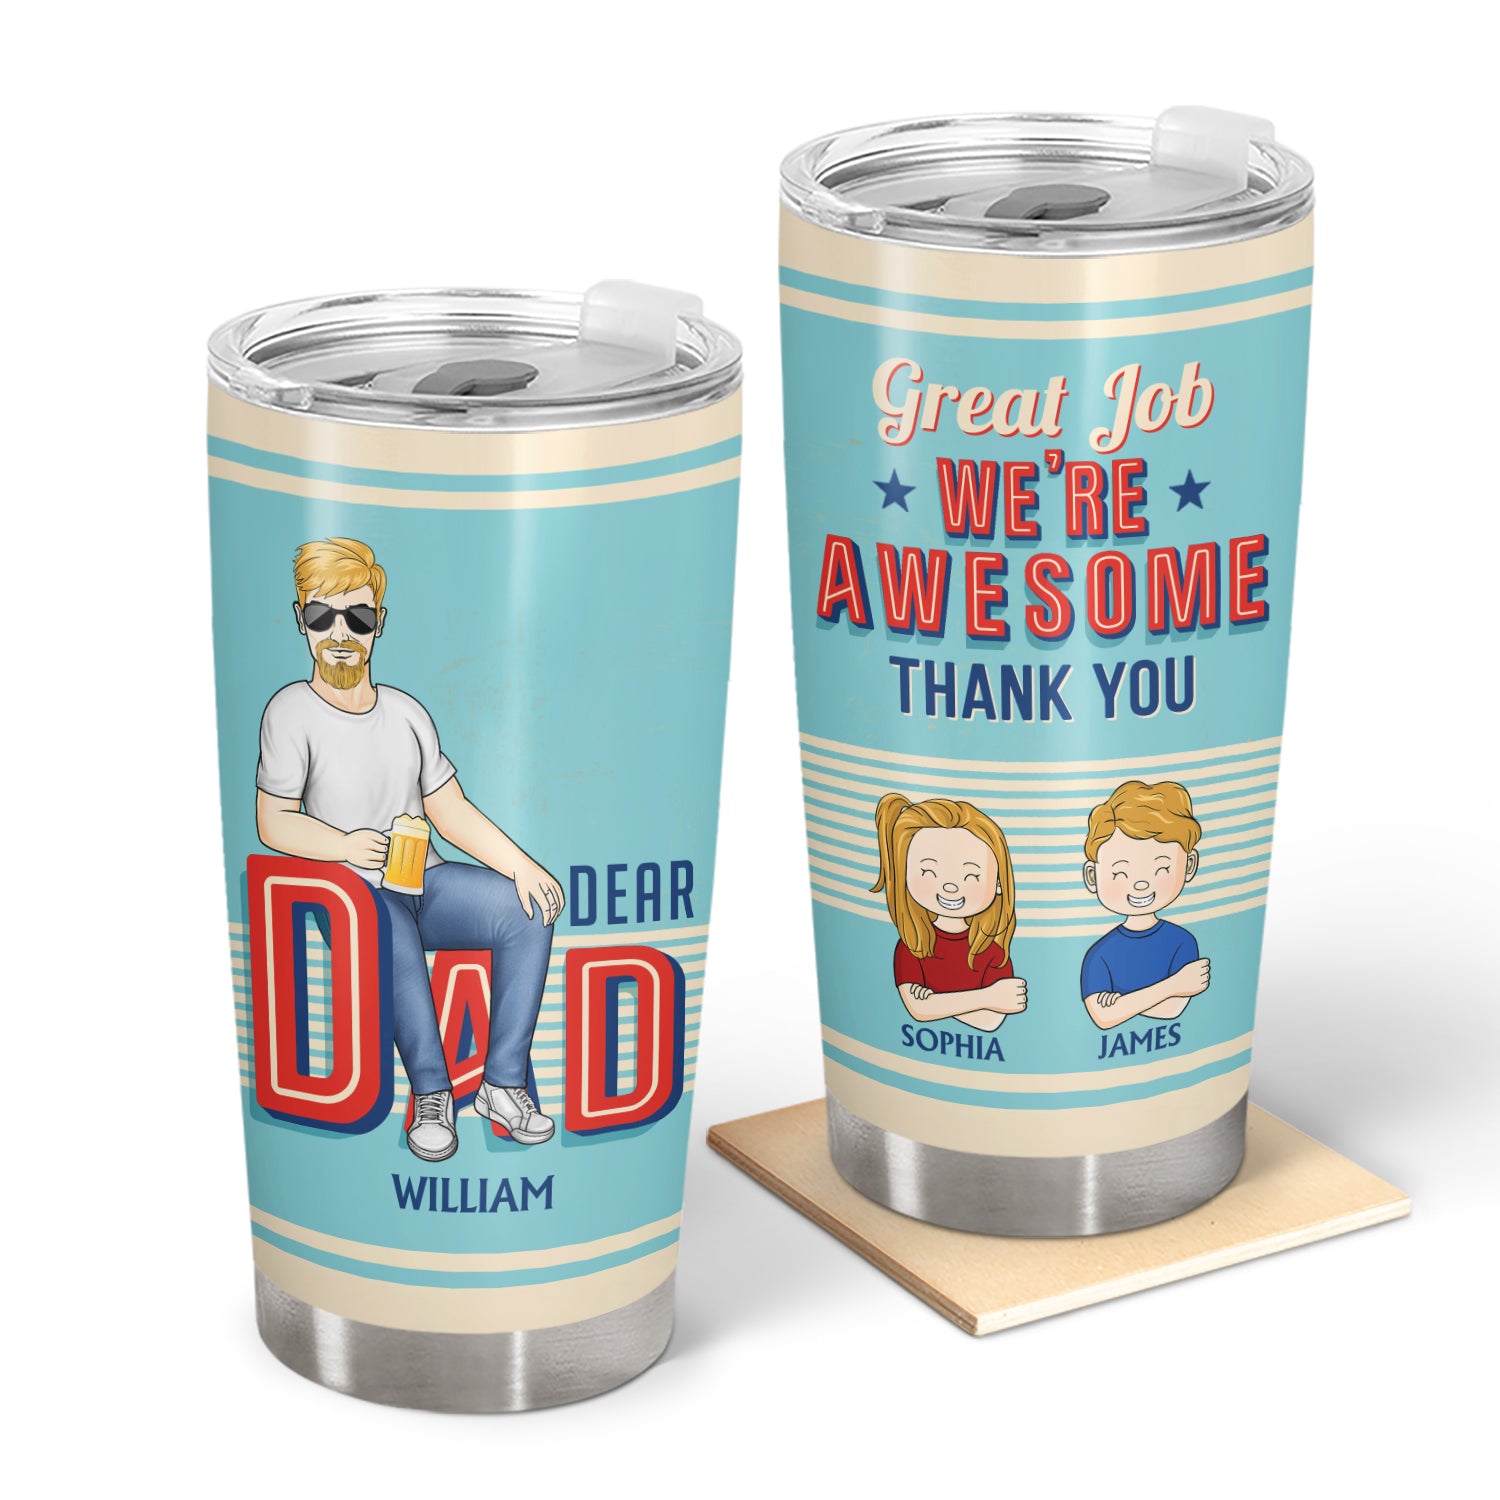 Dear Dad Great Job We're Awesome - Birthday Gift For Father, Family - Personalized Custom Tumbler